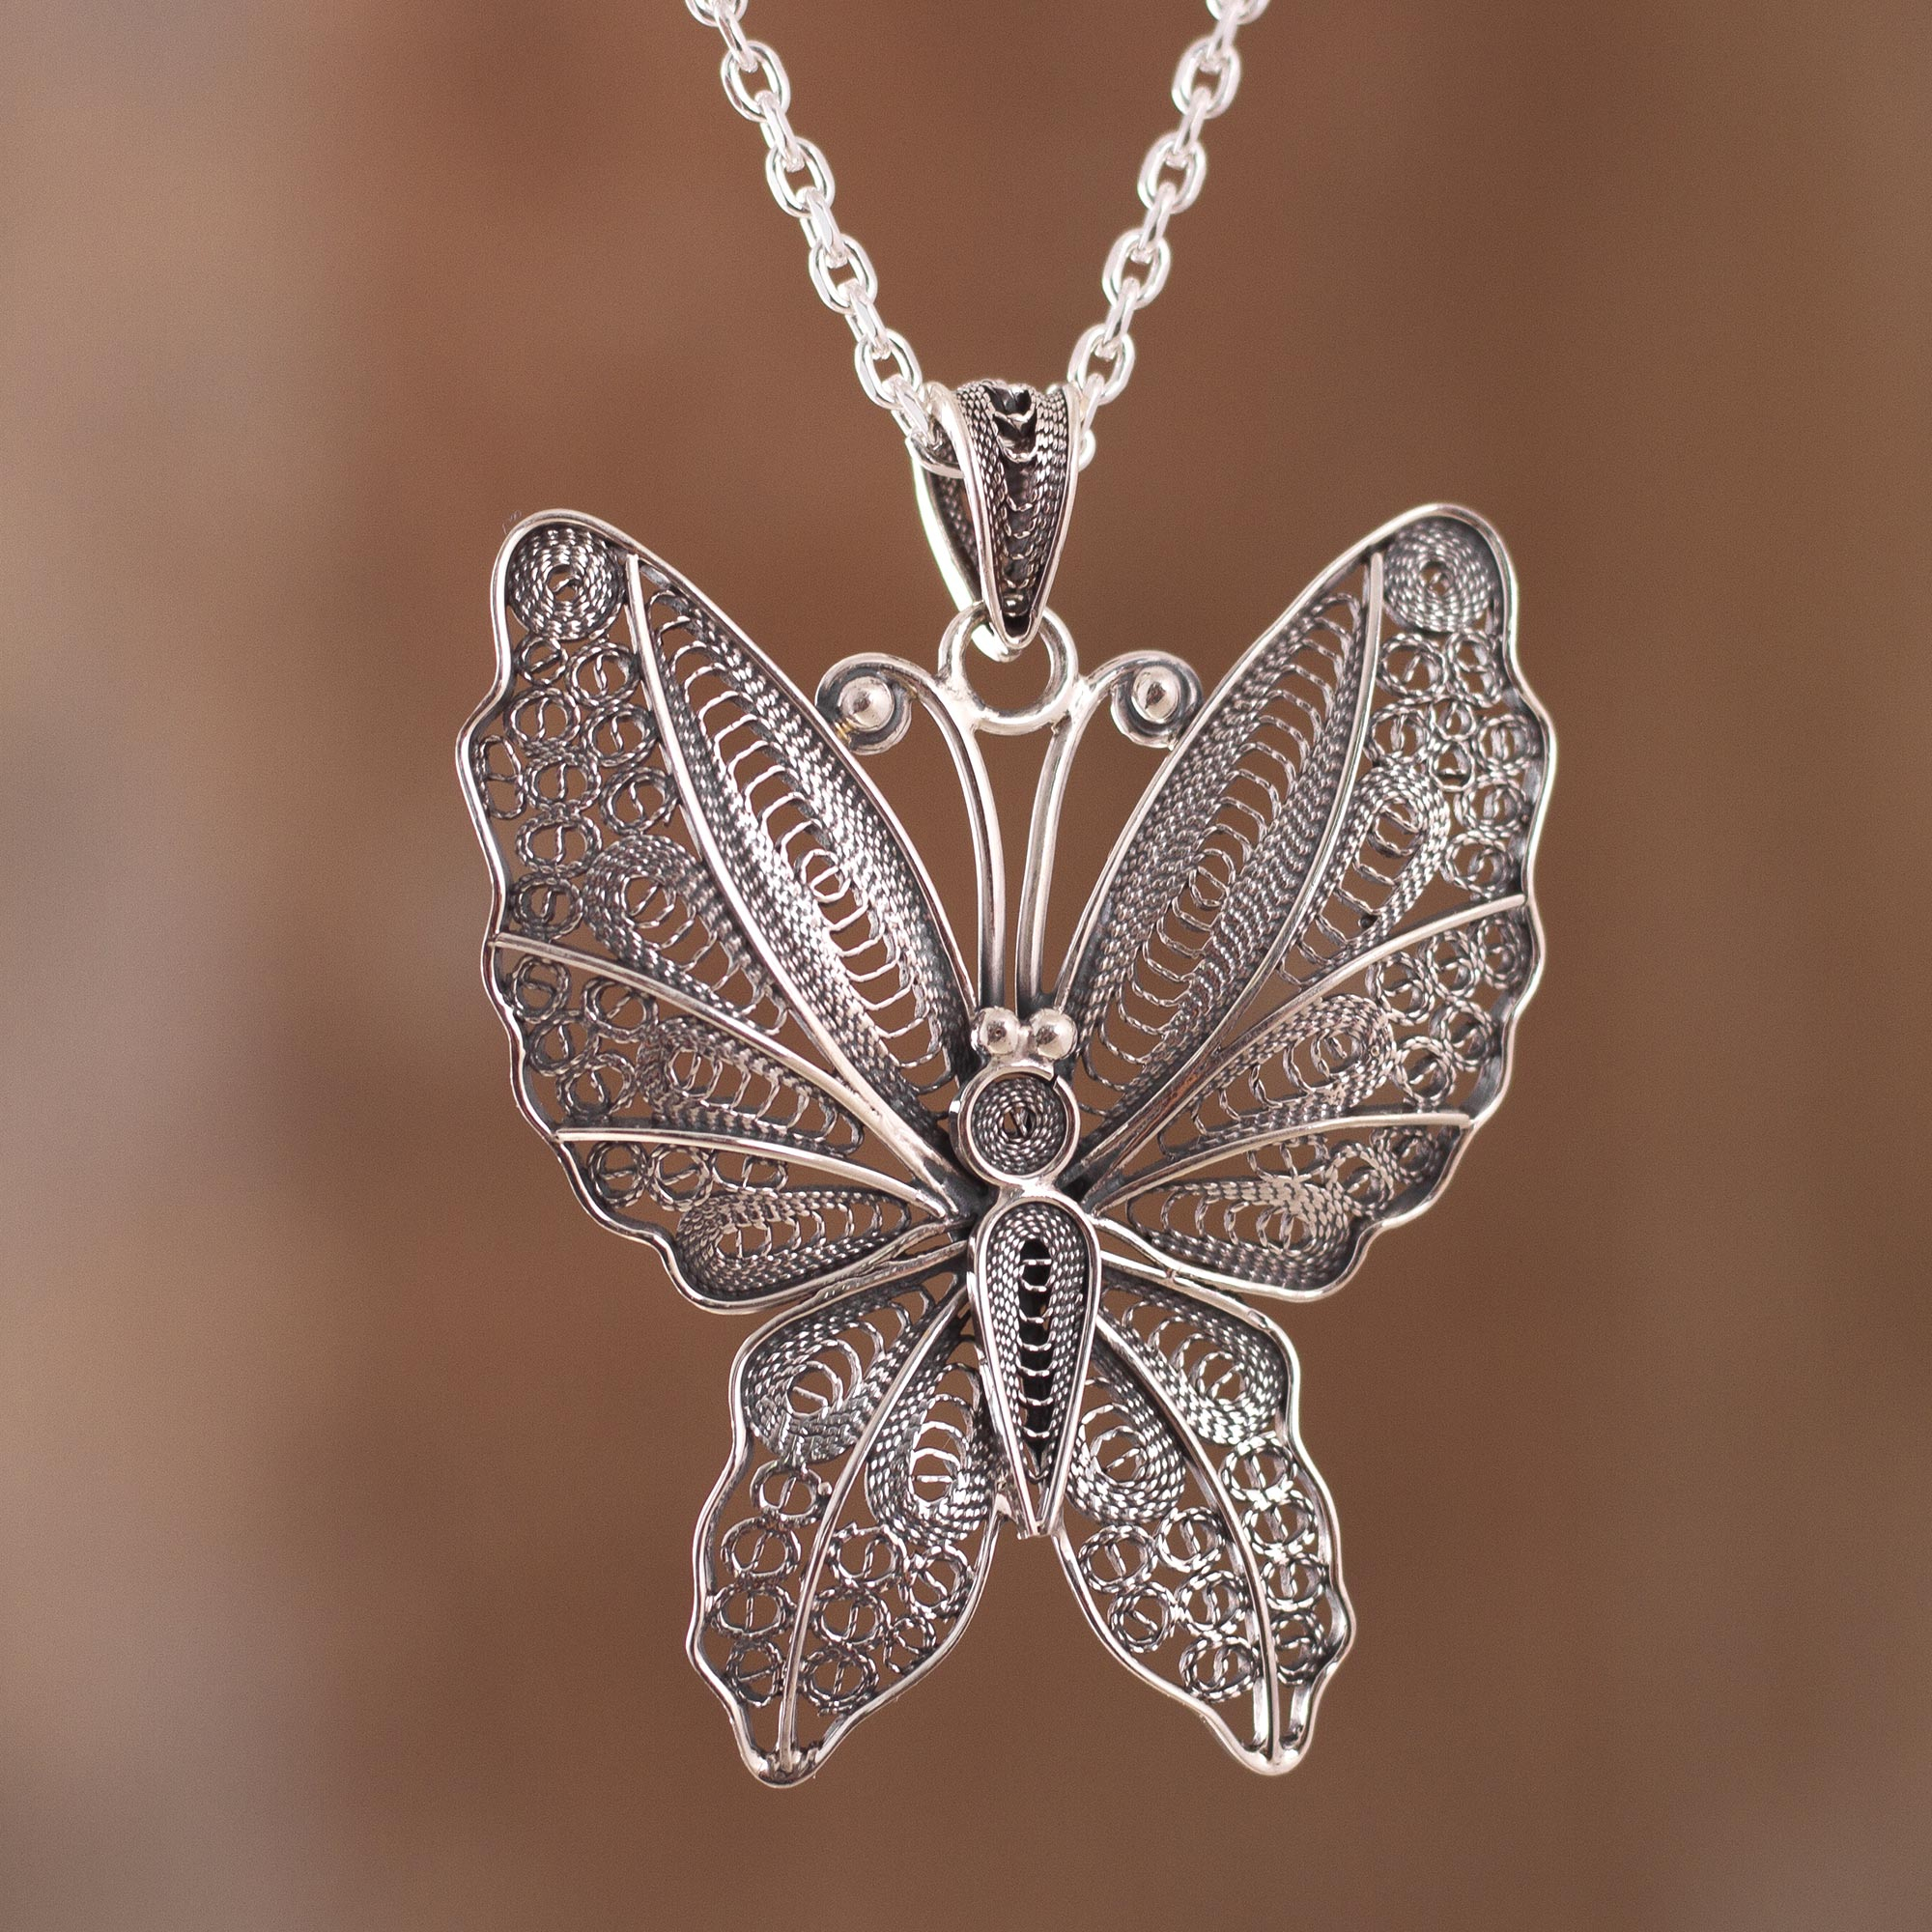 STERLING SILVER PENDANT FILIGREE BUTTERFLY SOLID 925